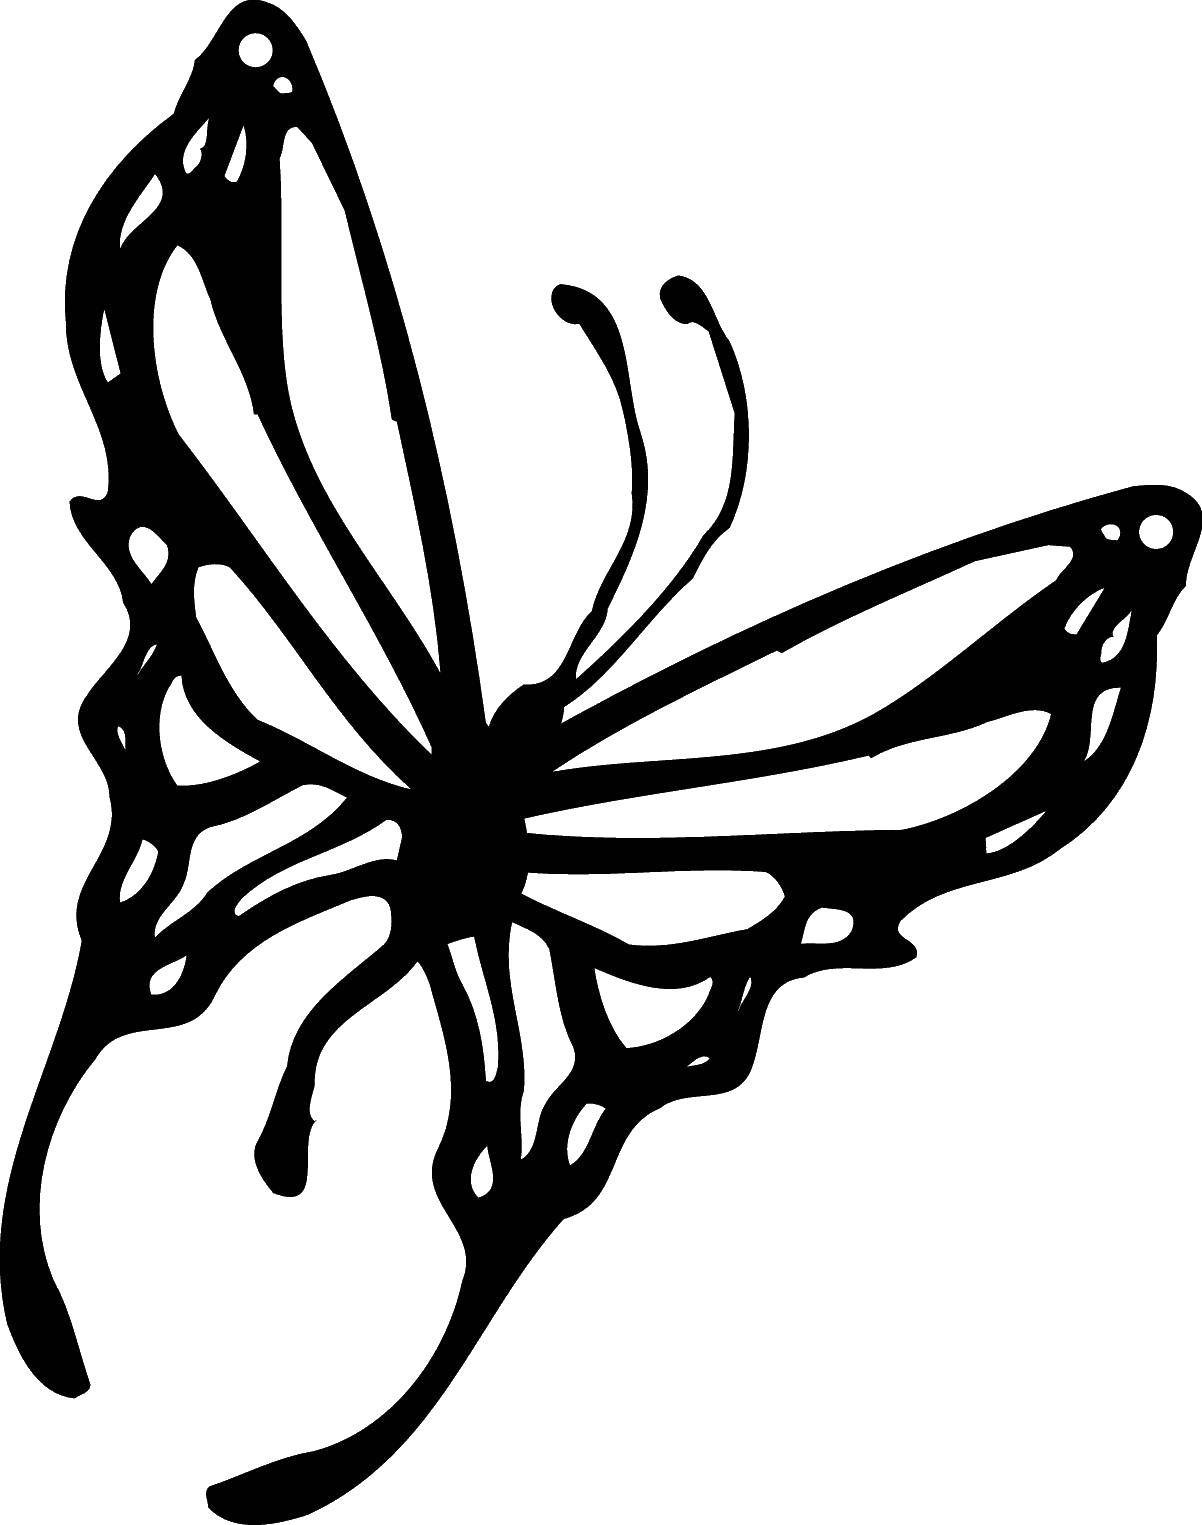 Coloring The butterfly silhouette. Category the contours for cutting out butterflies. Tags:  Outline , butterfly.